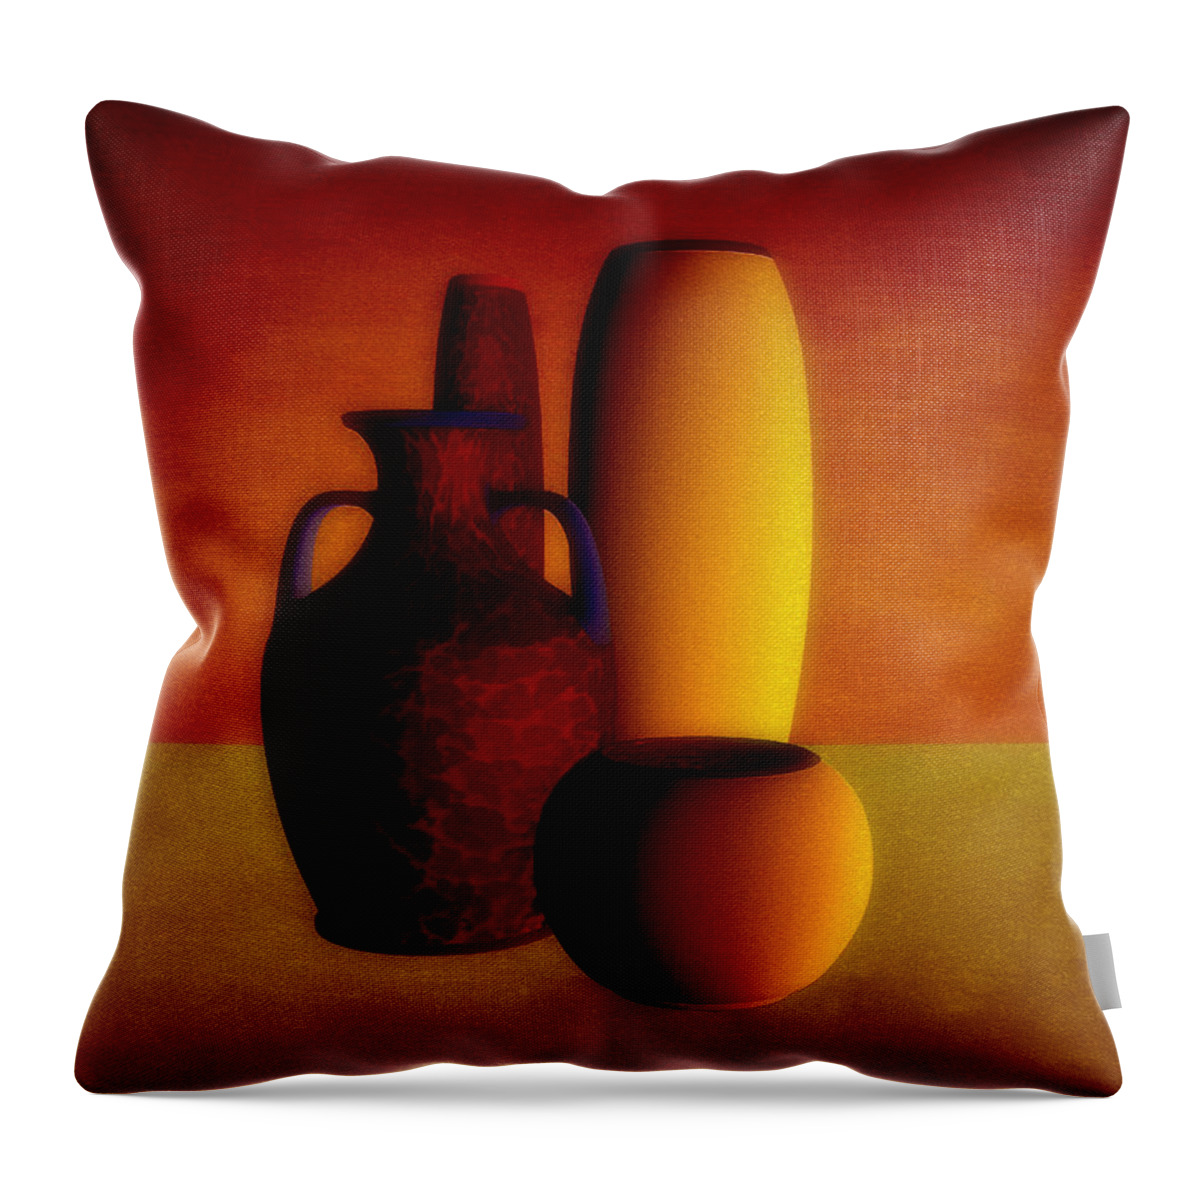 Vases Throw Pillow featuring the digital art Vases in warm tones by Ramon Martinez